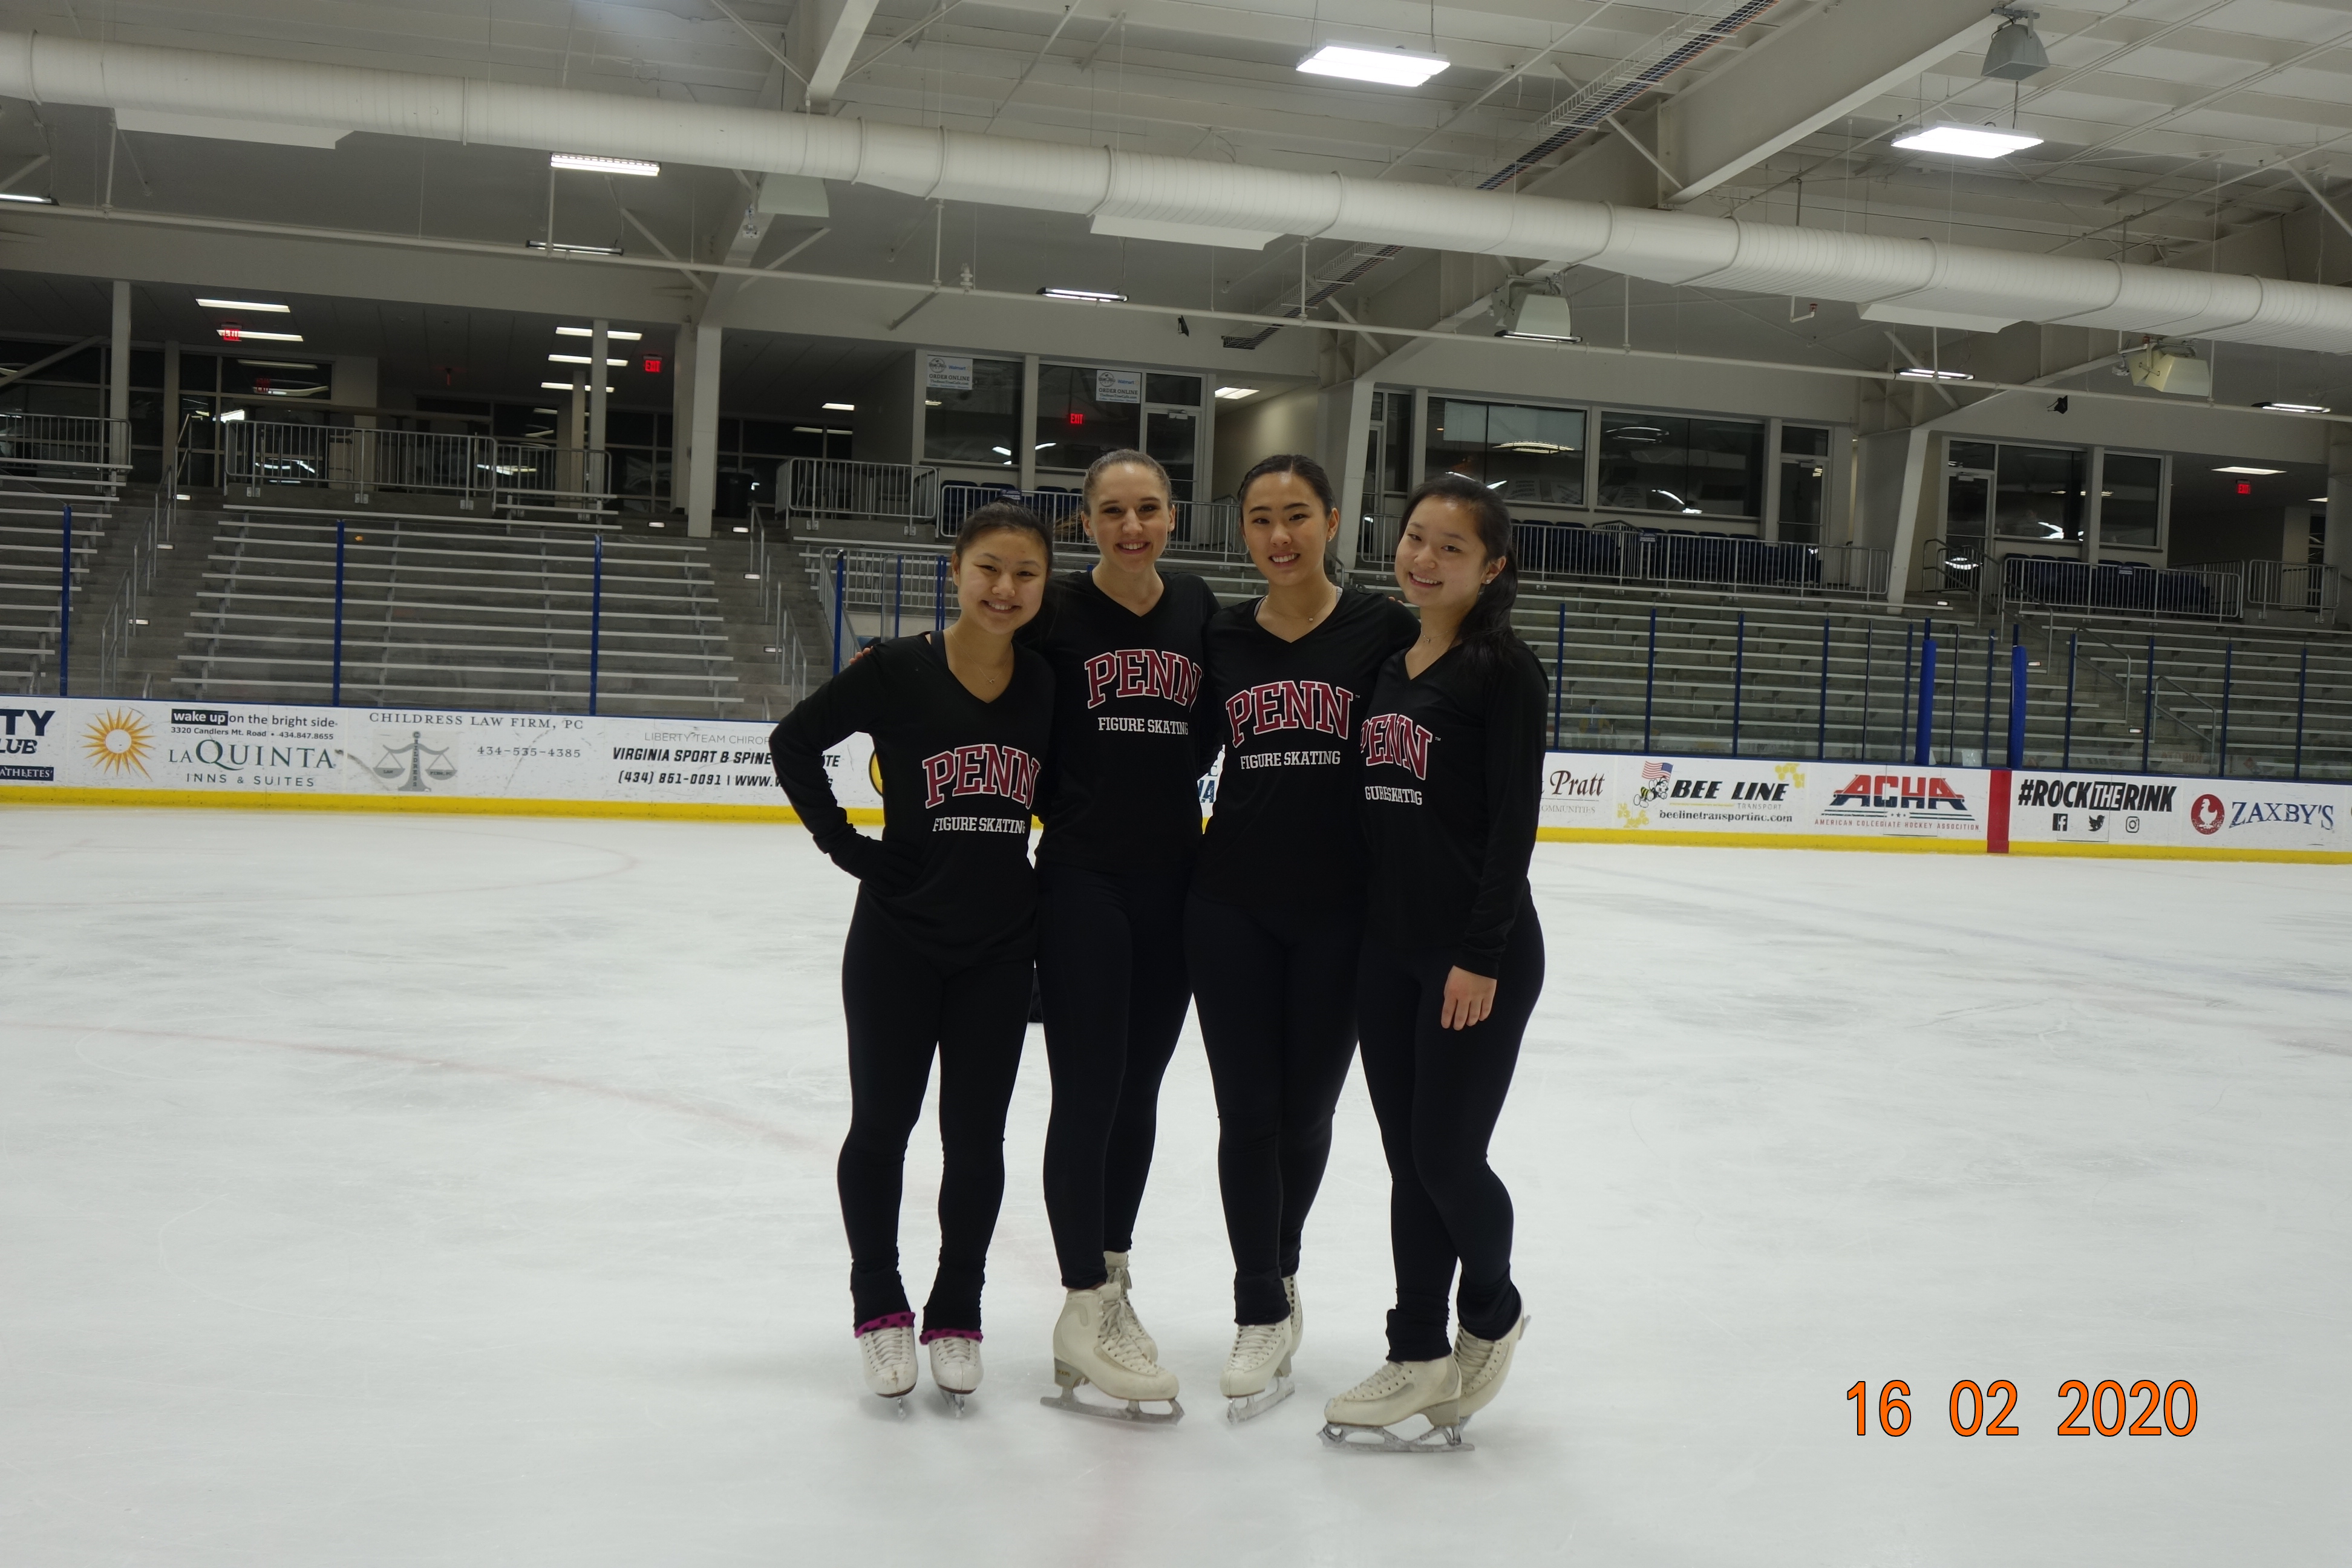 Four women stand on an ice rink with sweatshirts that say "Penn"